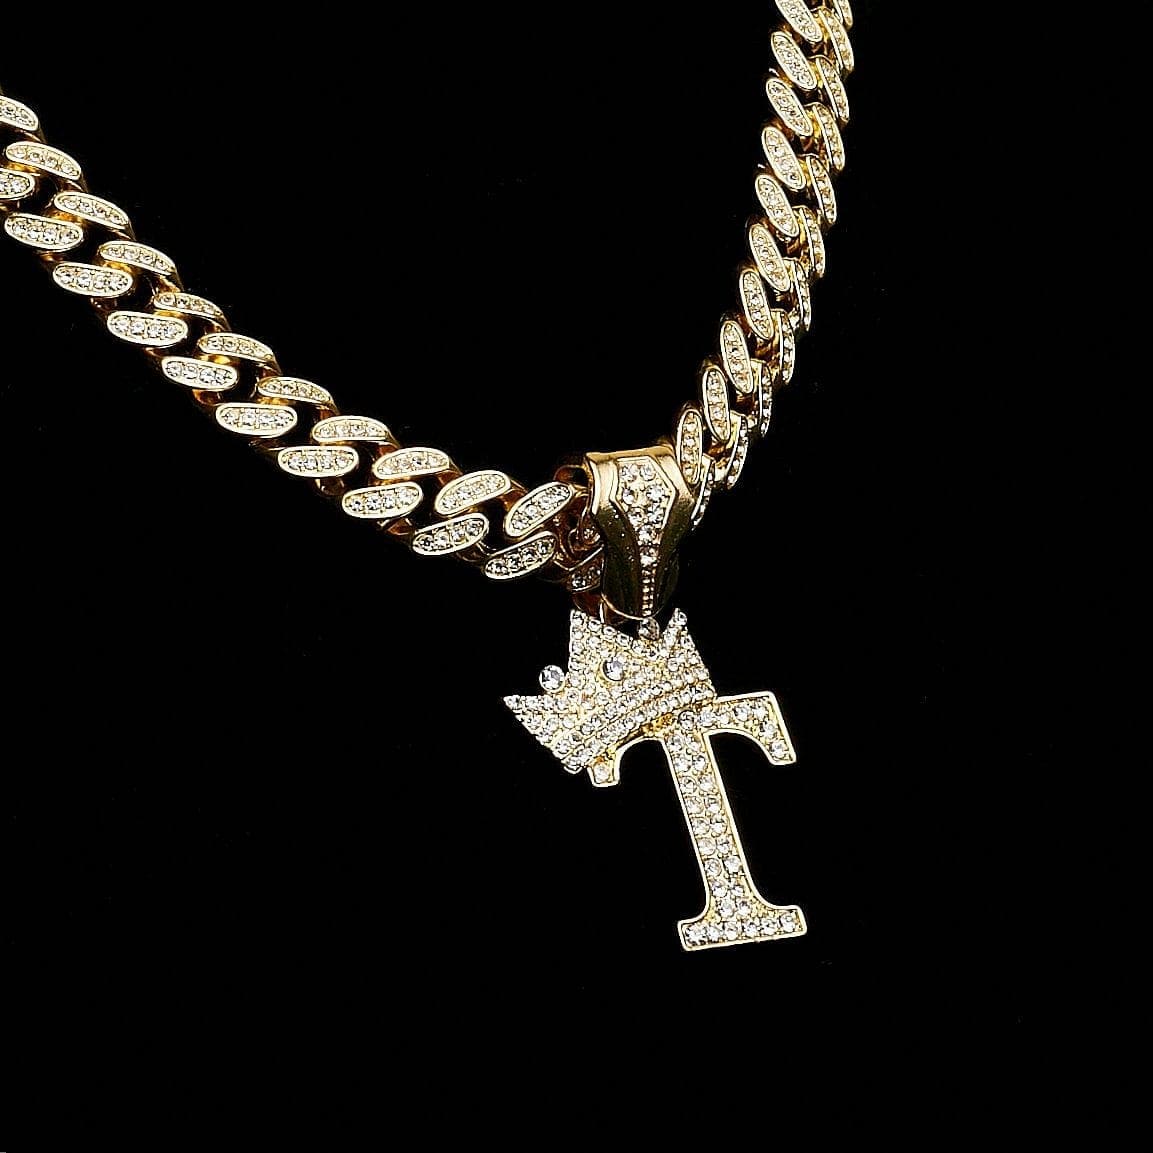 VVS Jewelry hip hop jewelry Gold / I VVS Jewelry Crowned Initial Cuban Pendant Chain